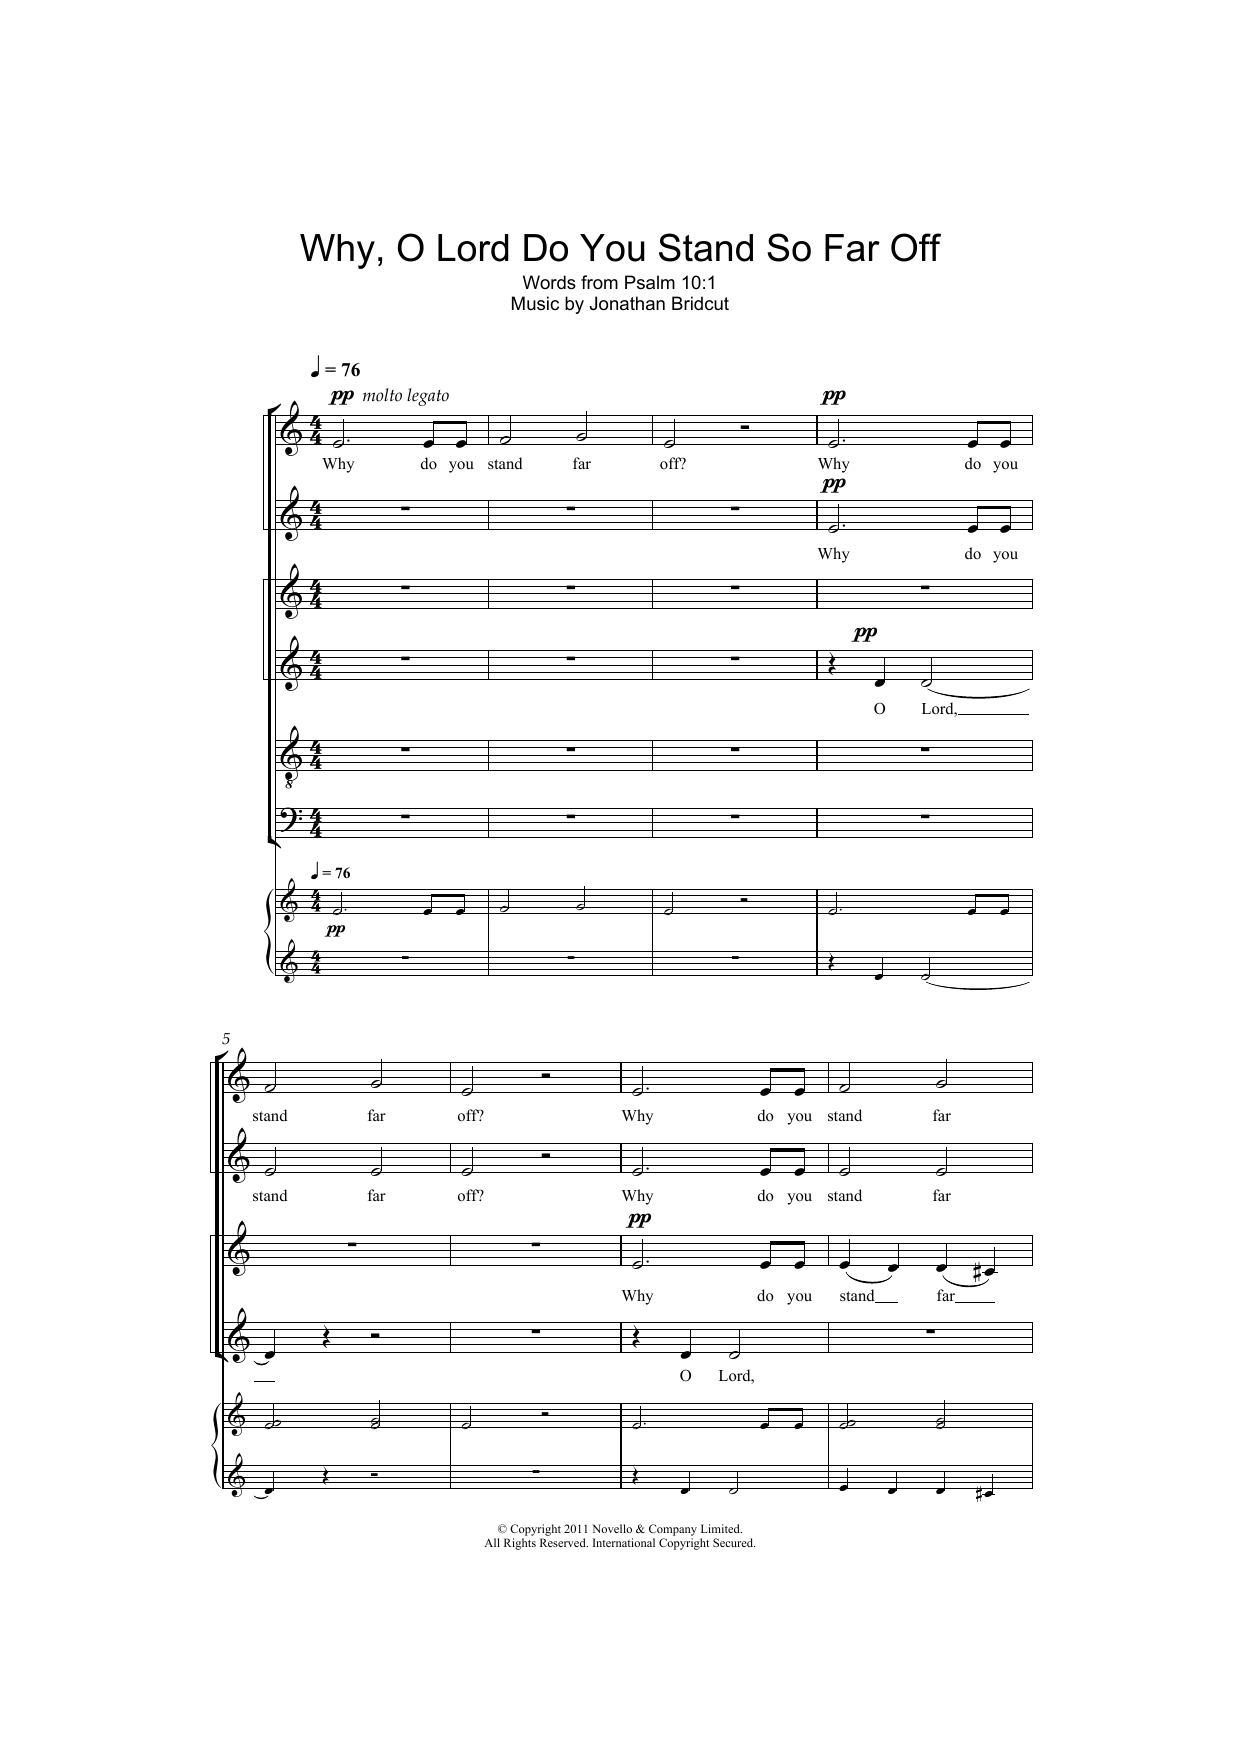 Download Jonathan Bridcut Why, O Lord Do You Stand So Far Off Sheet Music